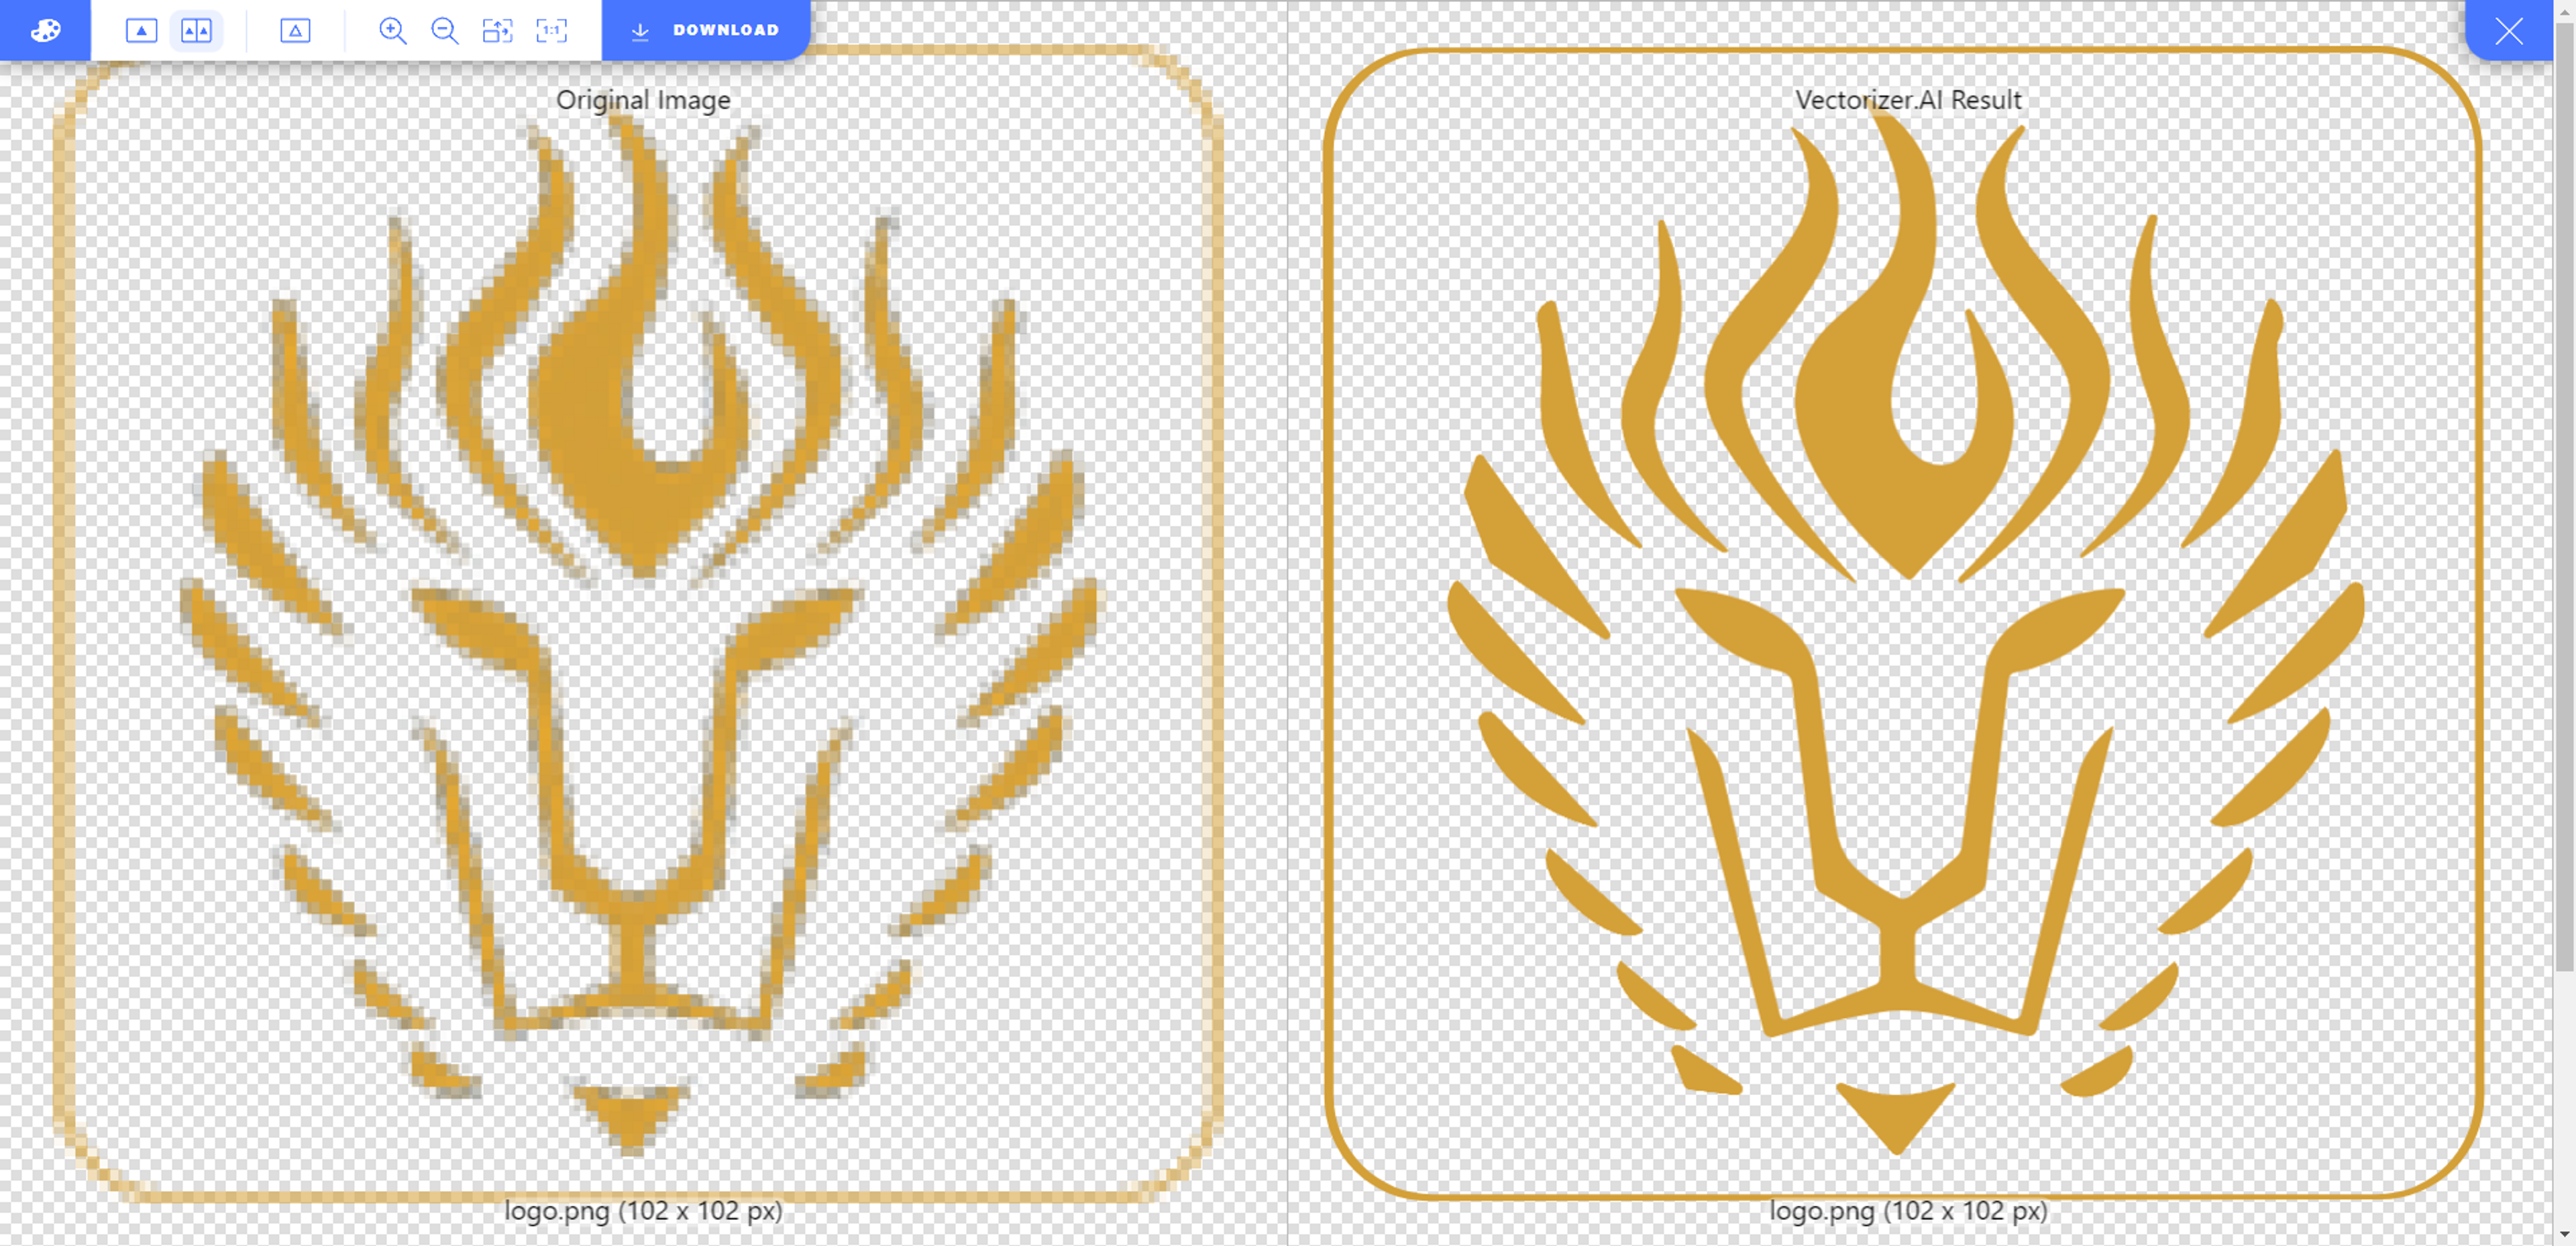 Side by side comparison of bitmap and SVG logo